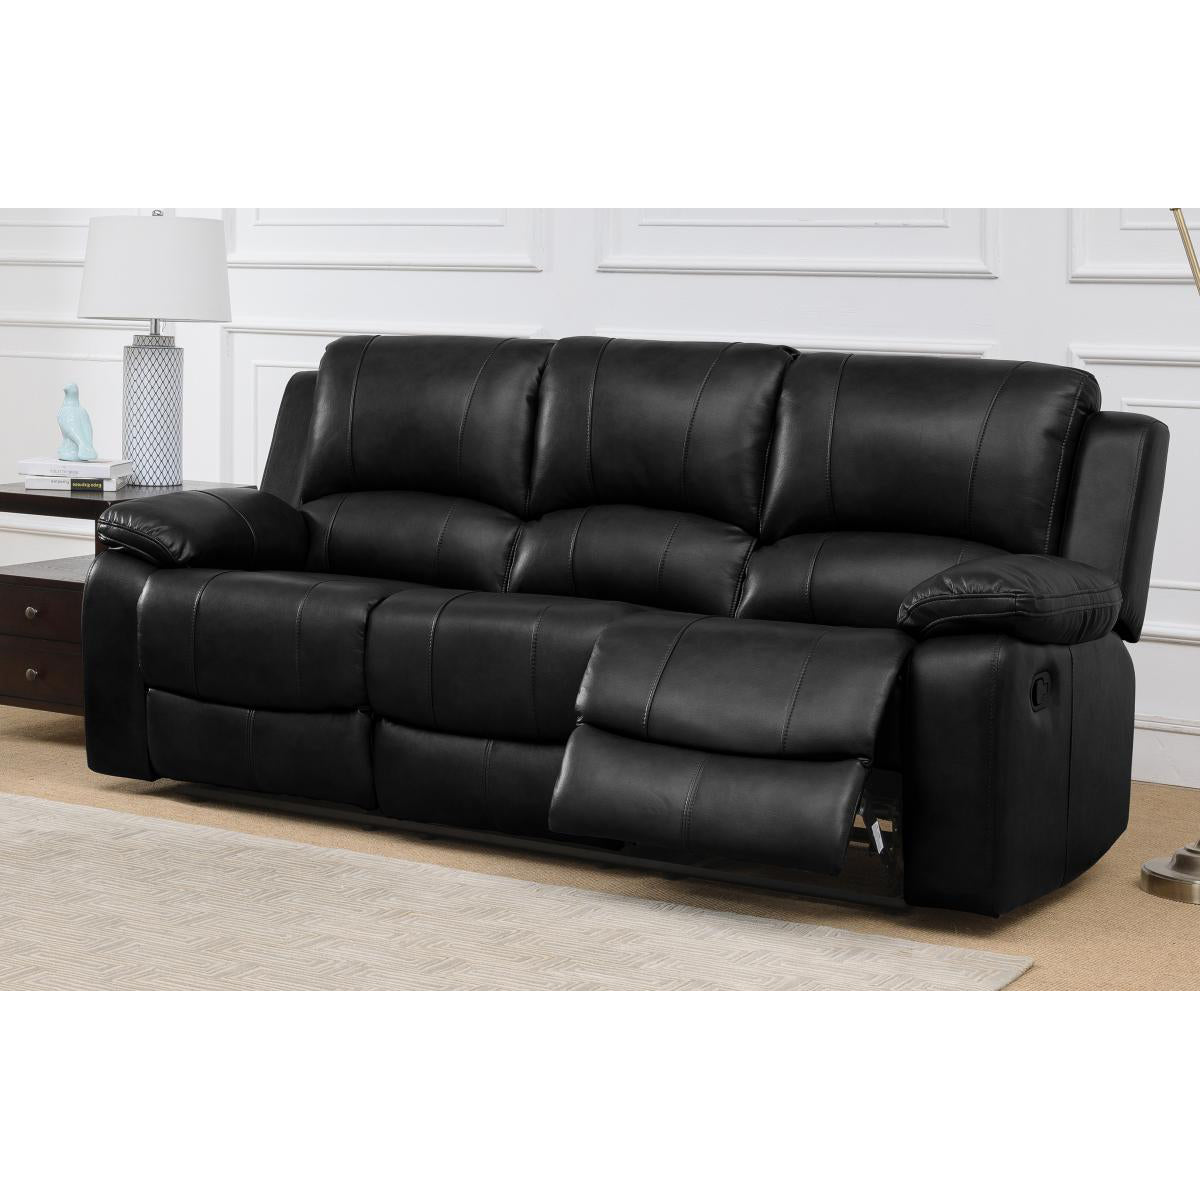 Andalusia Recliner Leathergel And PU 3 Seater Black